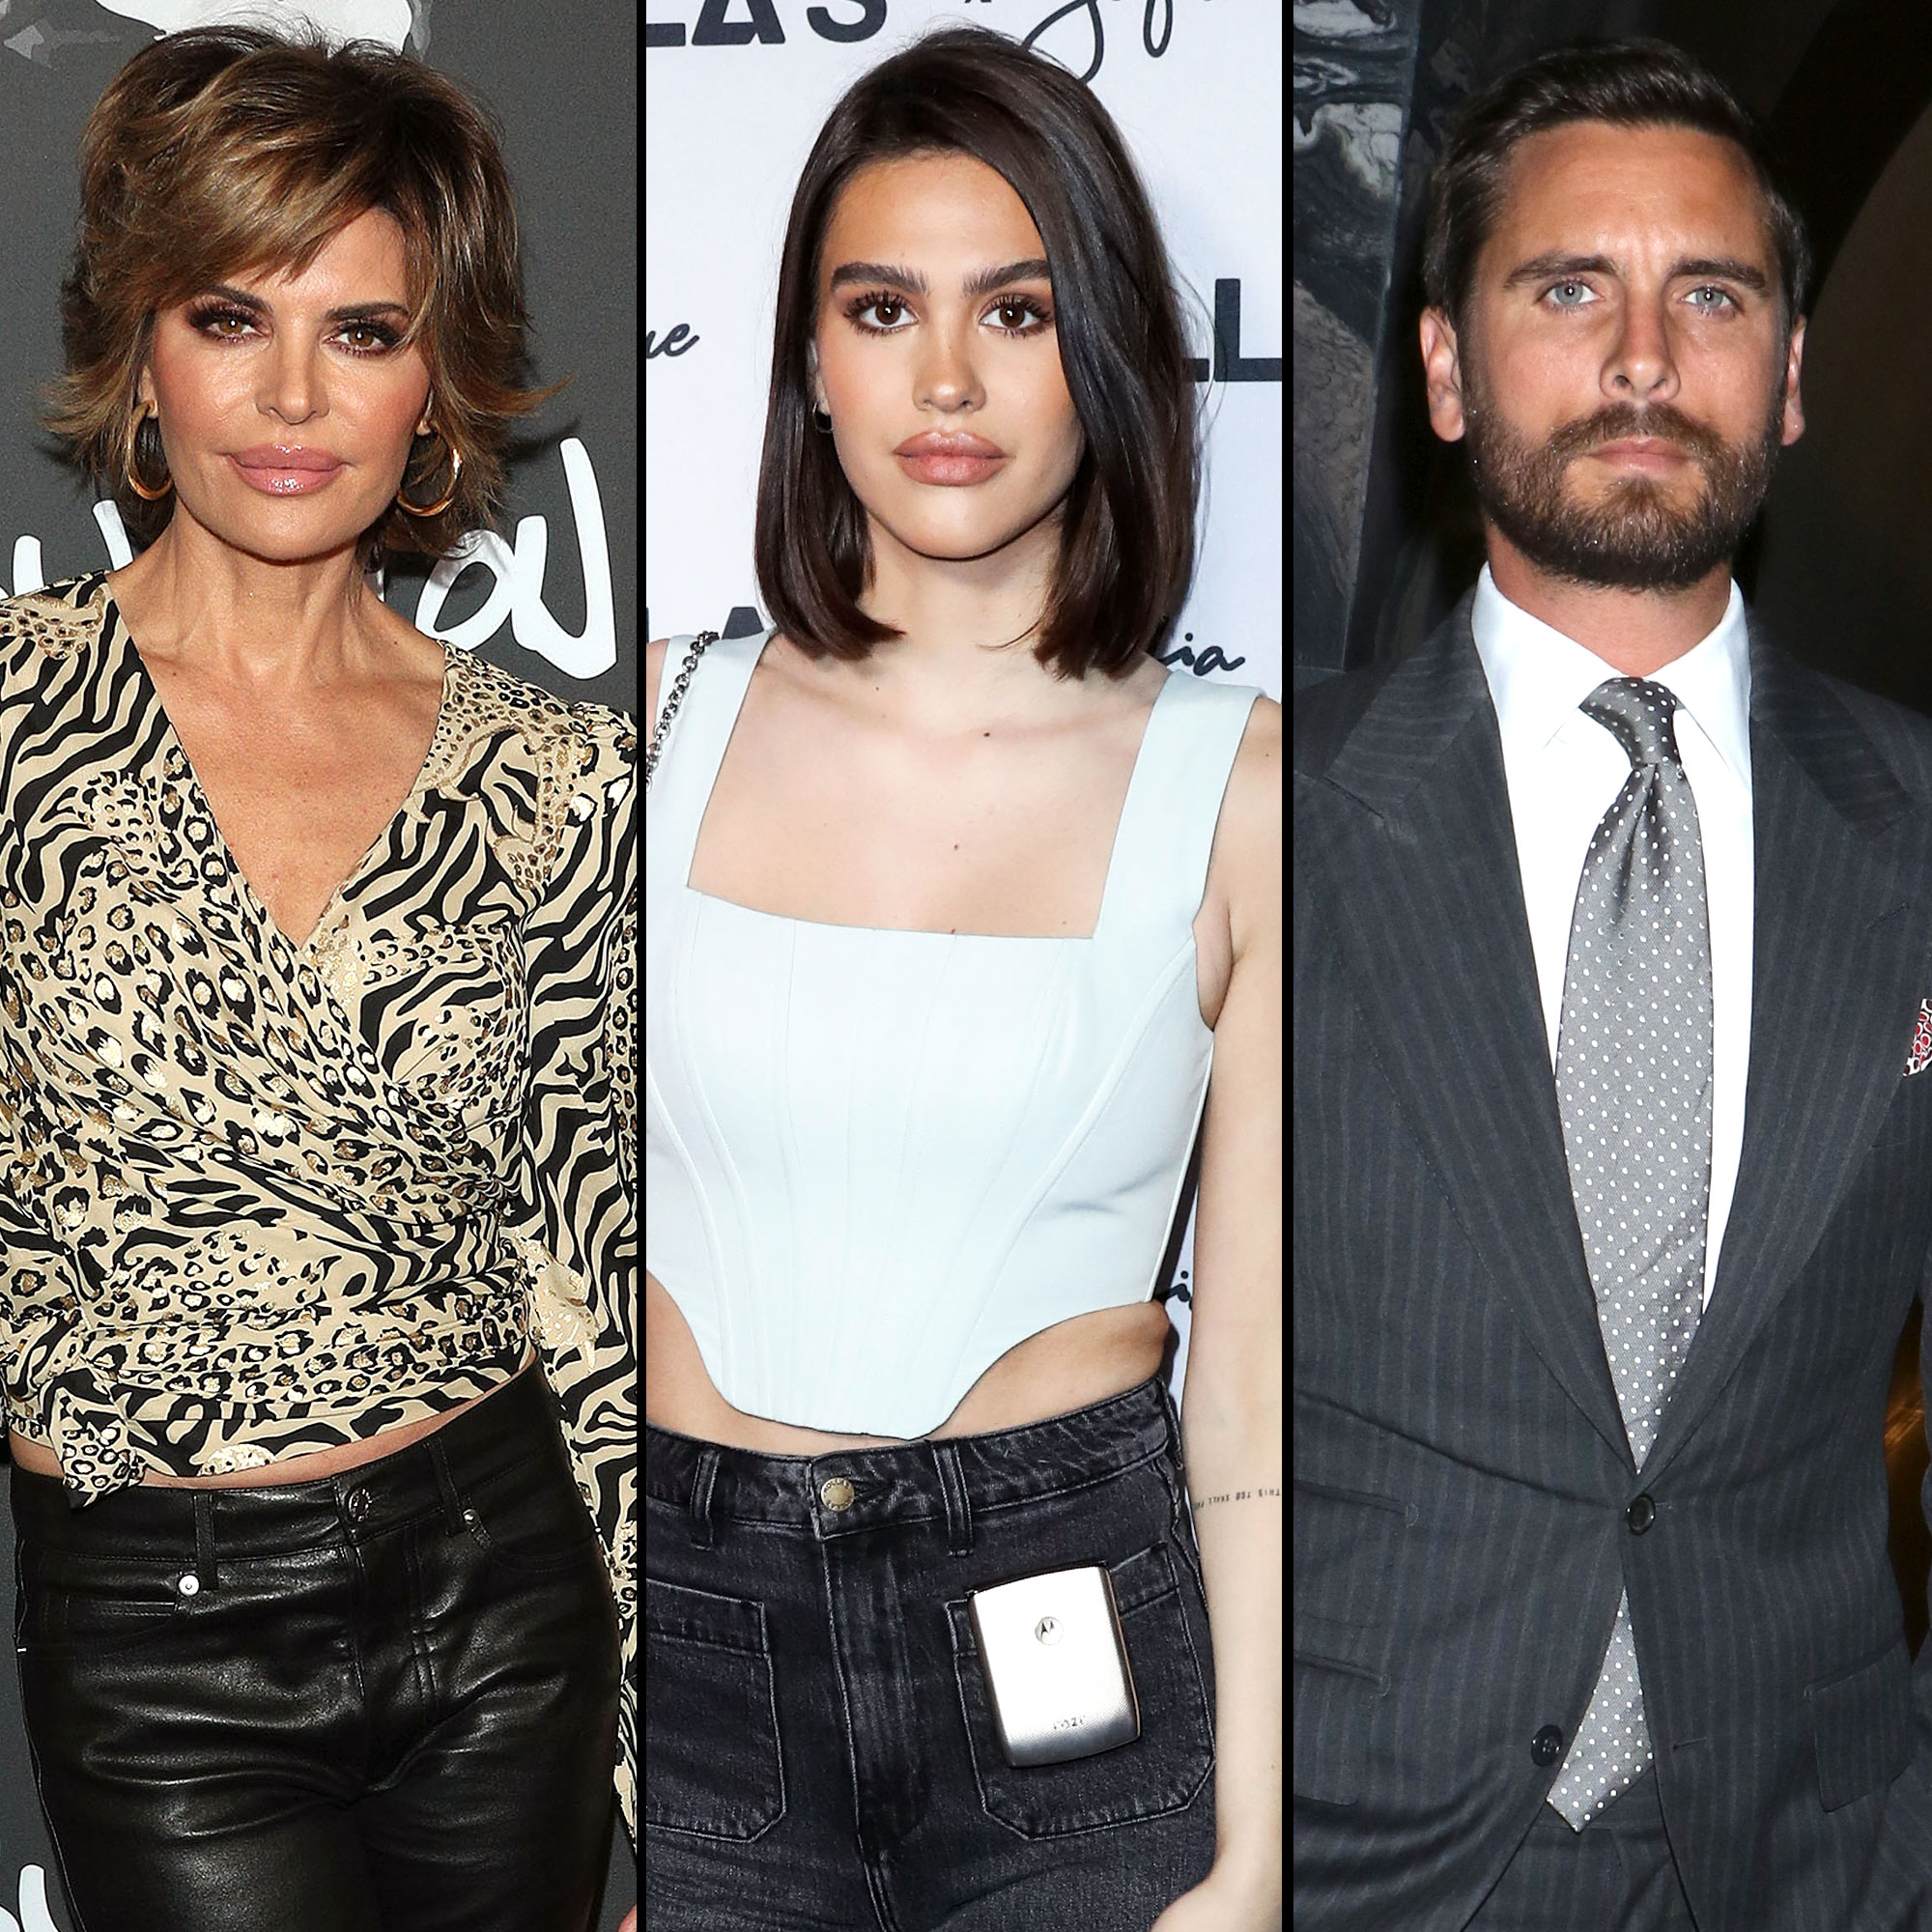 Lisa Rinna Flips Out About Amelia Hamlin Dating Scott Disick: He's